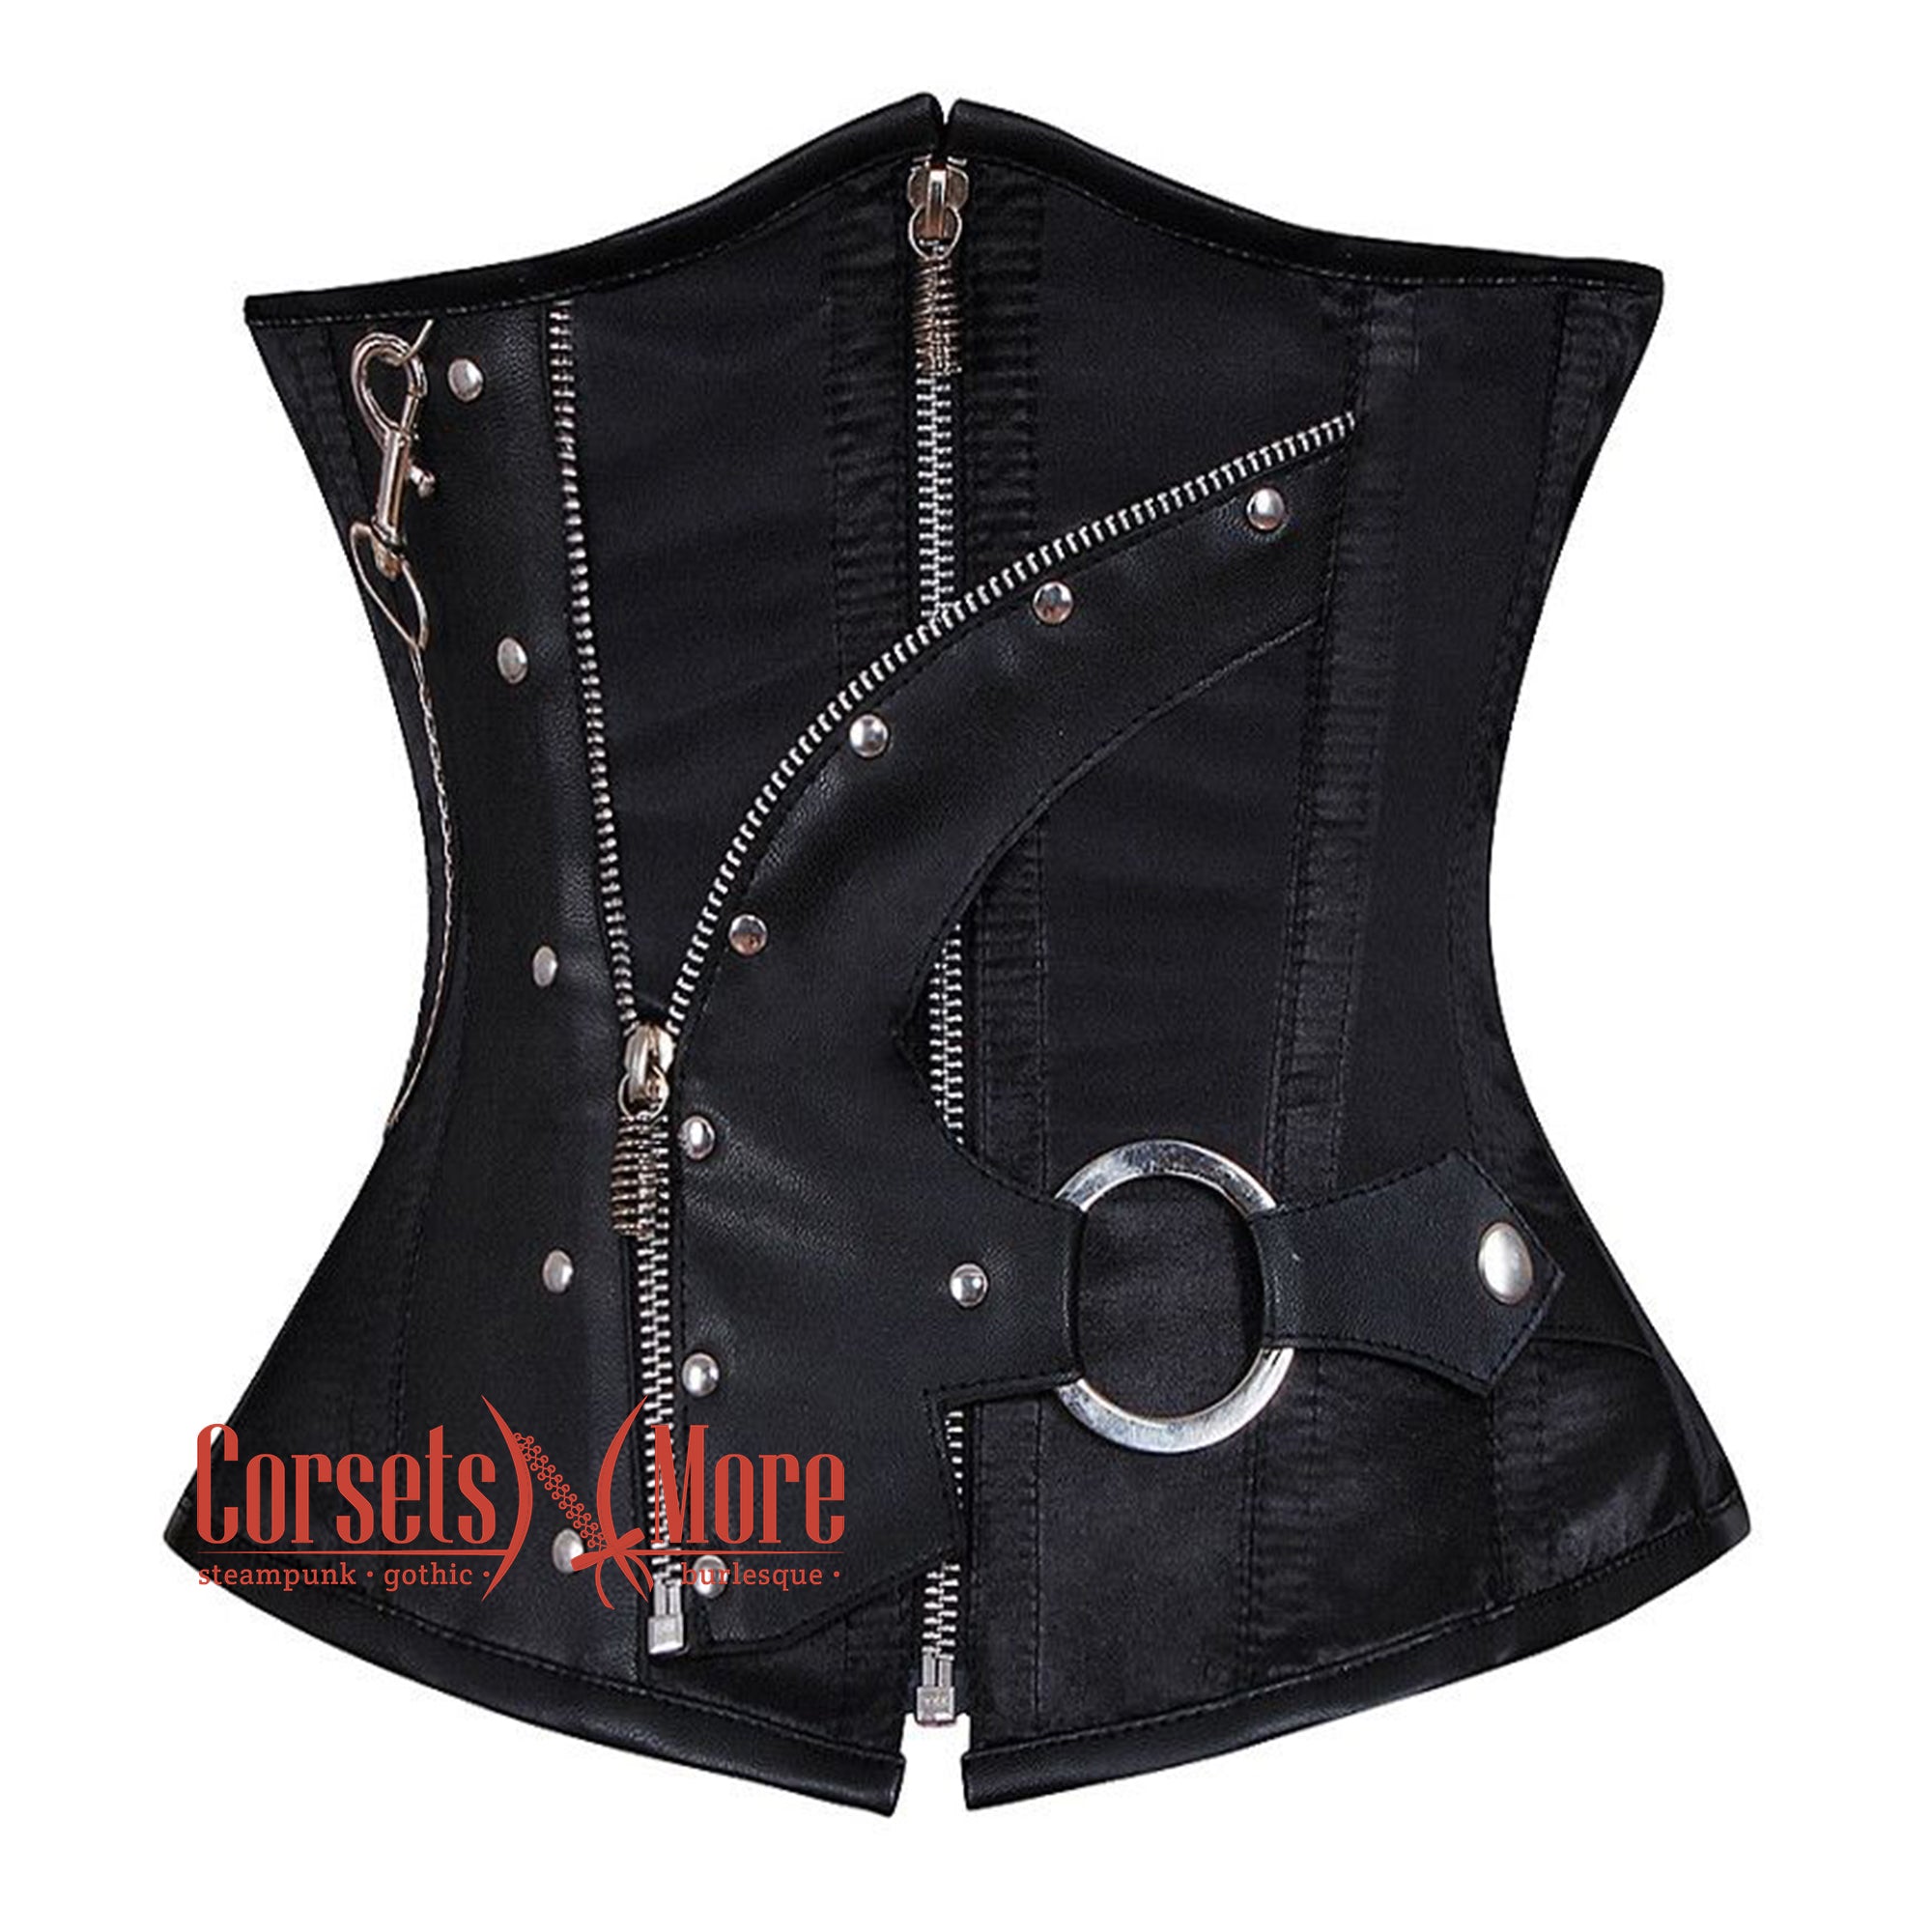 Shop Custom Made Corsets & Steampunk Underbust Corset at low price